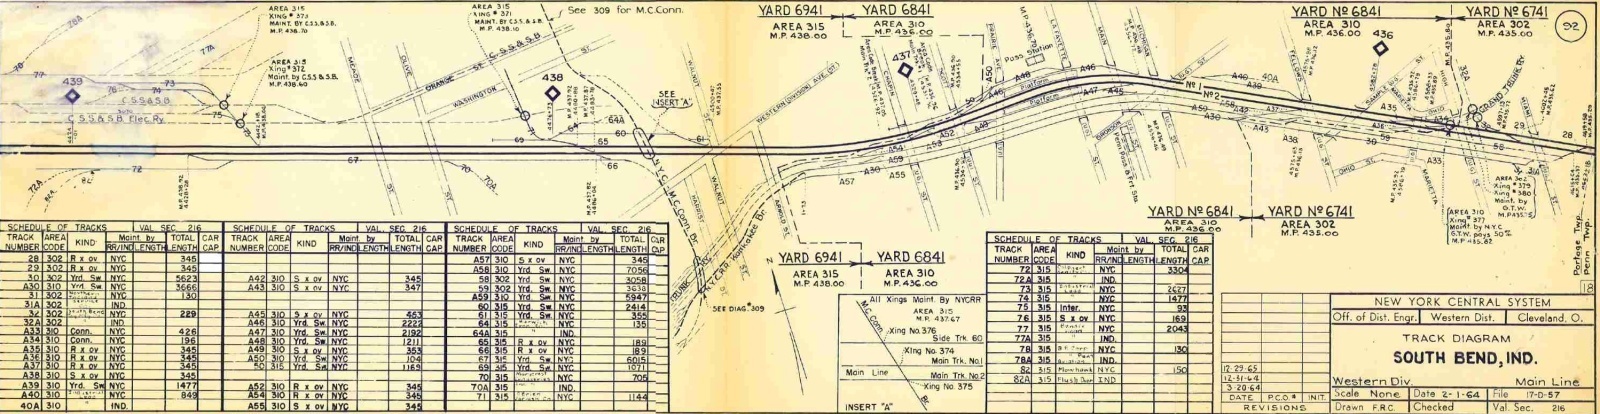 NYC South Bend Track Diagram